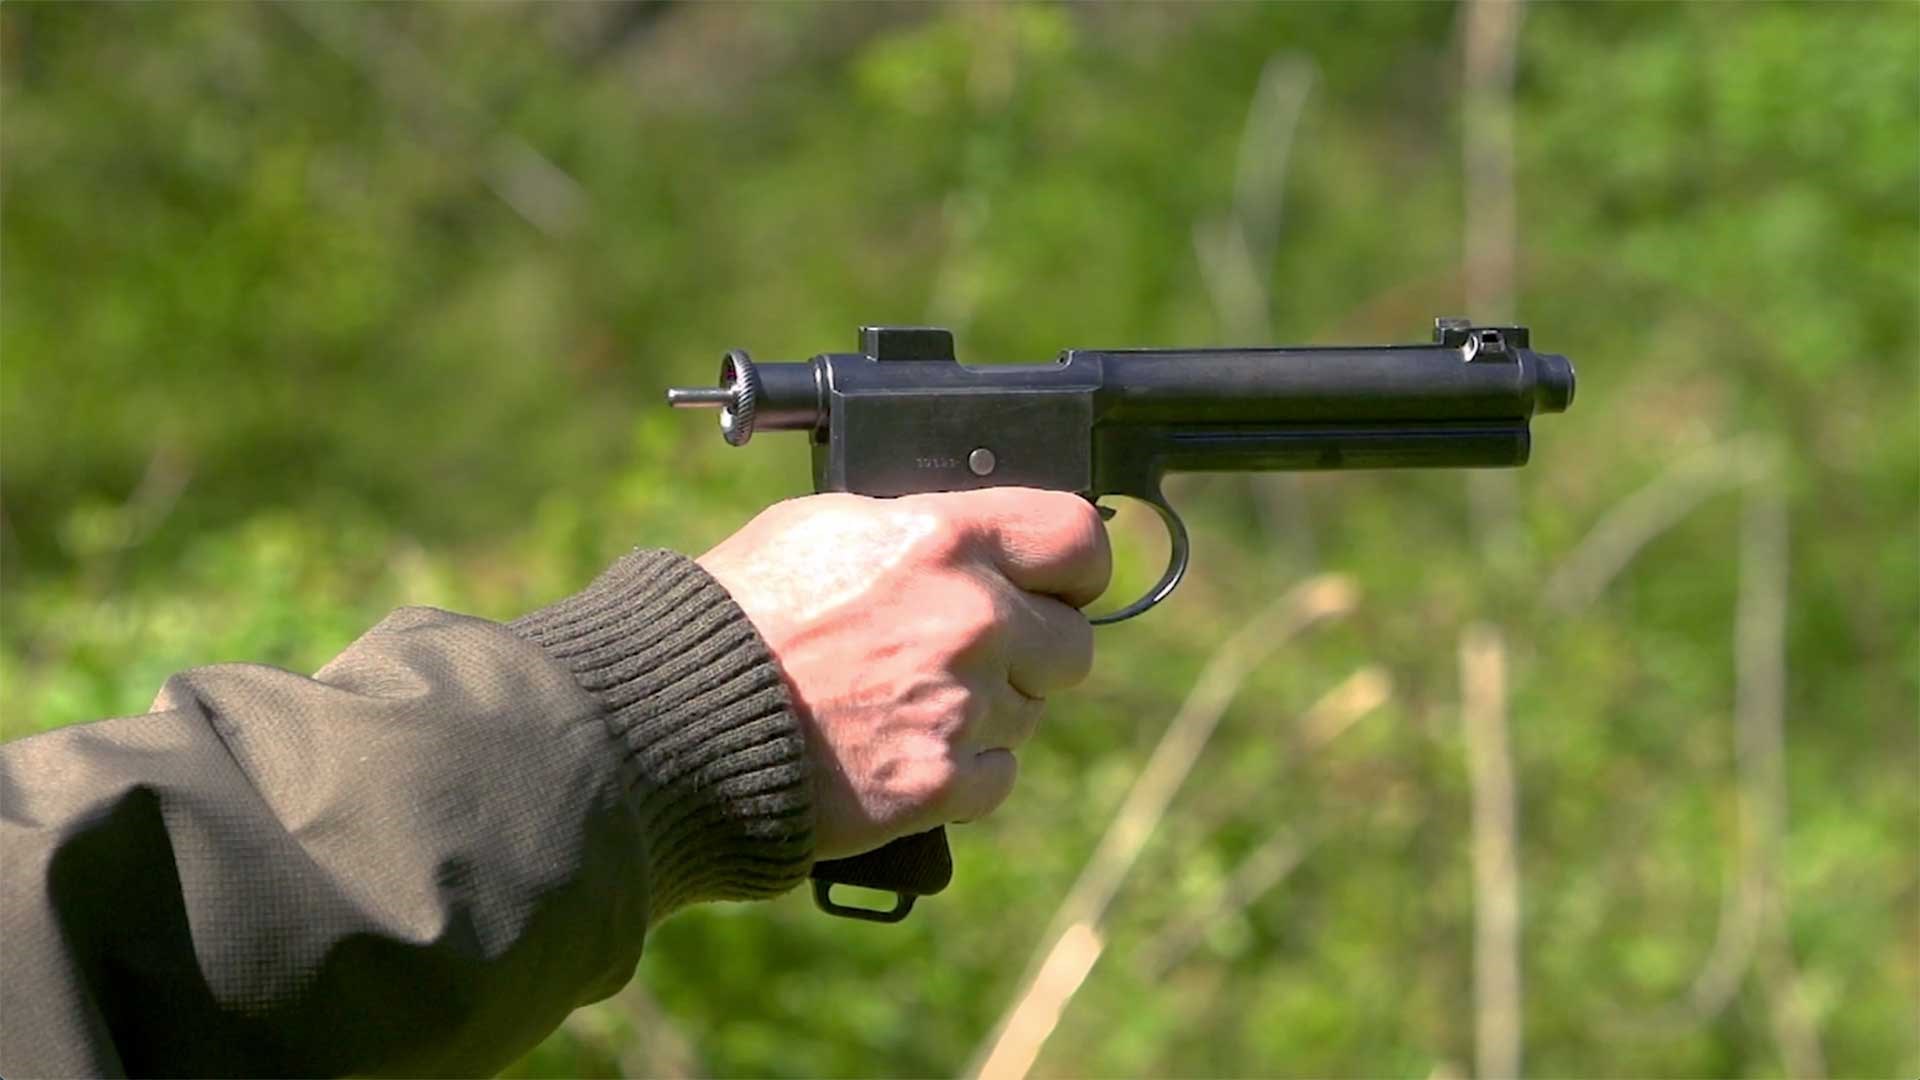 A man aims the M1907 Roth-Steyr pistol on a green outdoor range.